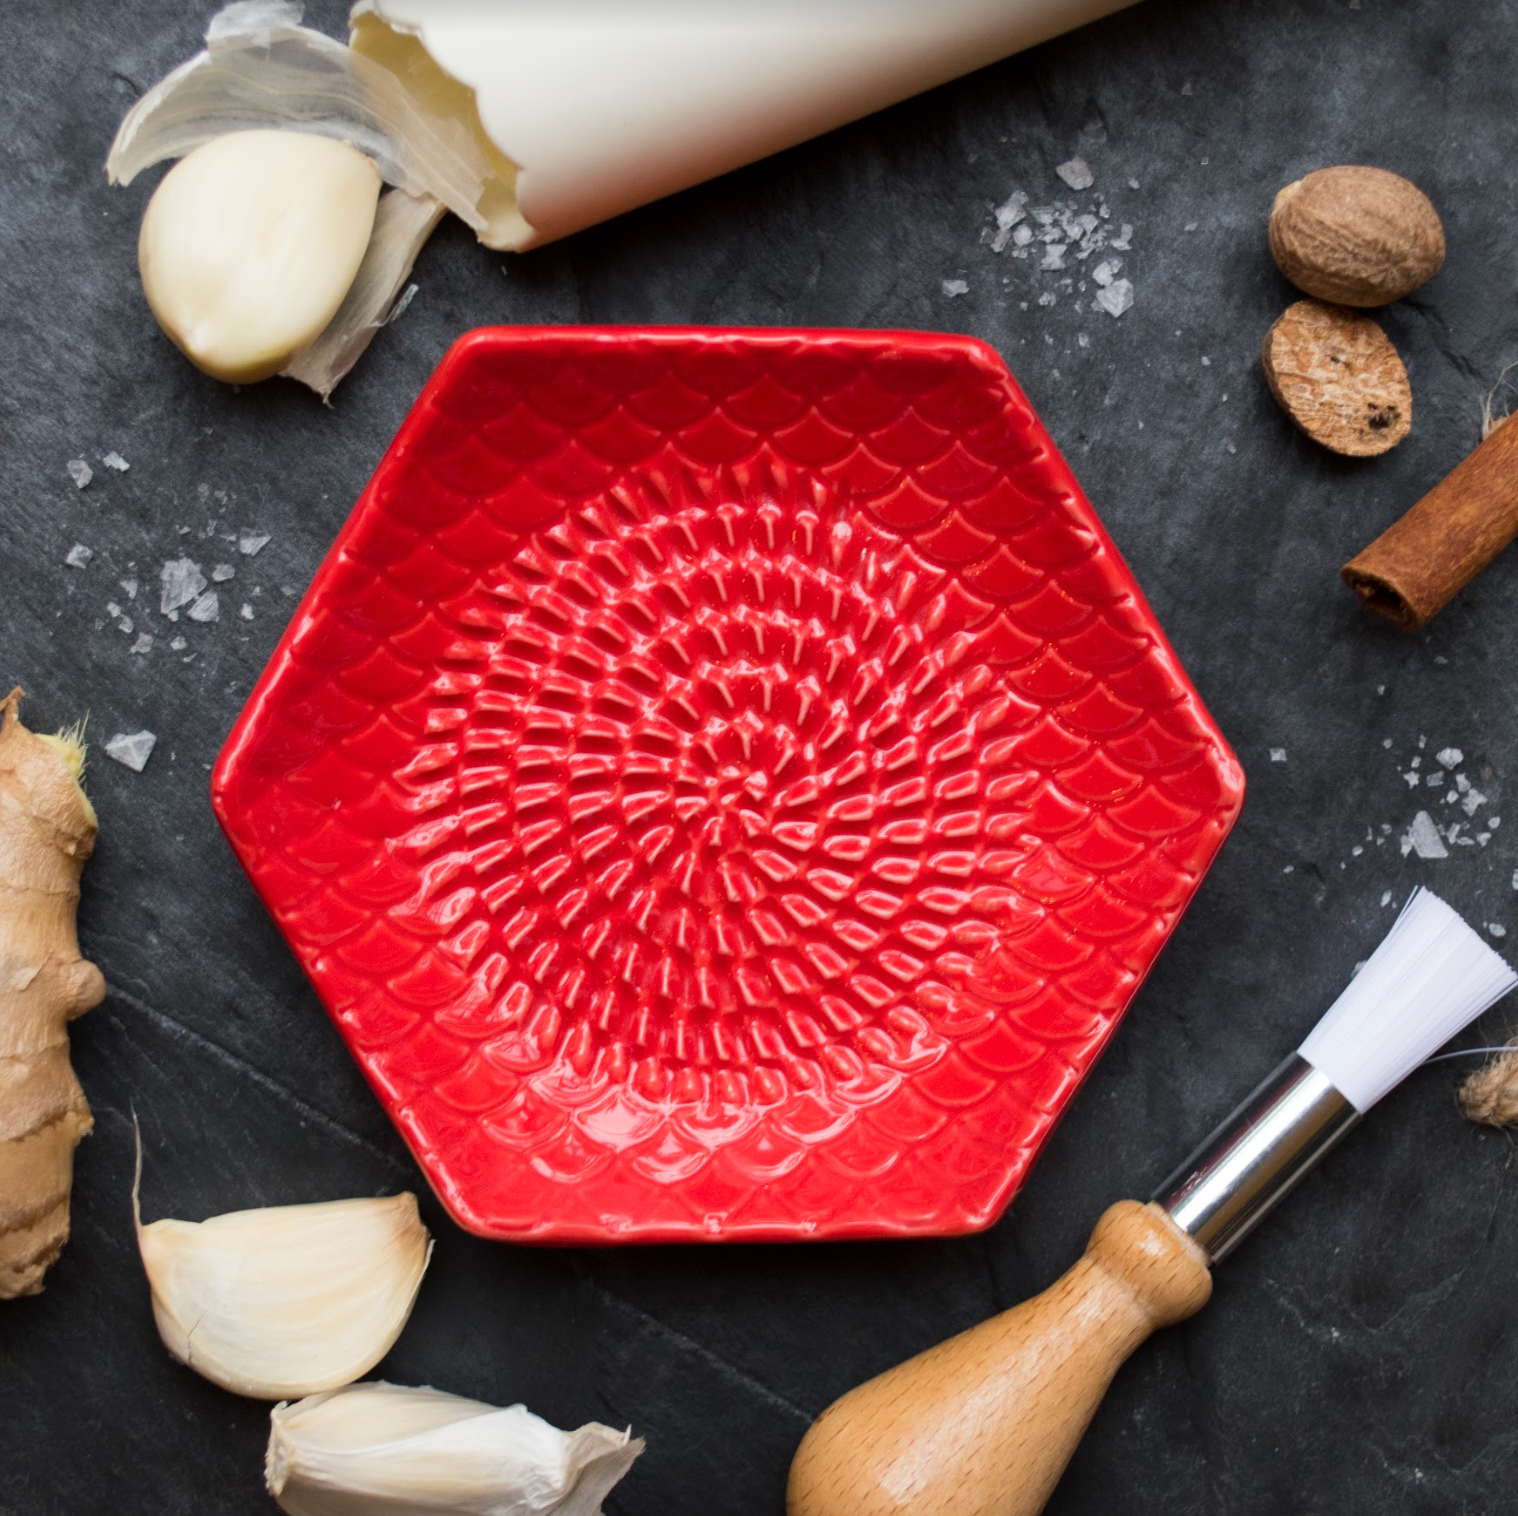 The Grate Plate Ceramic Grater: Red